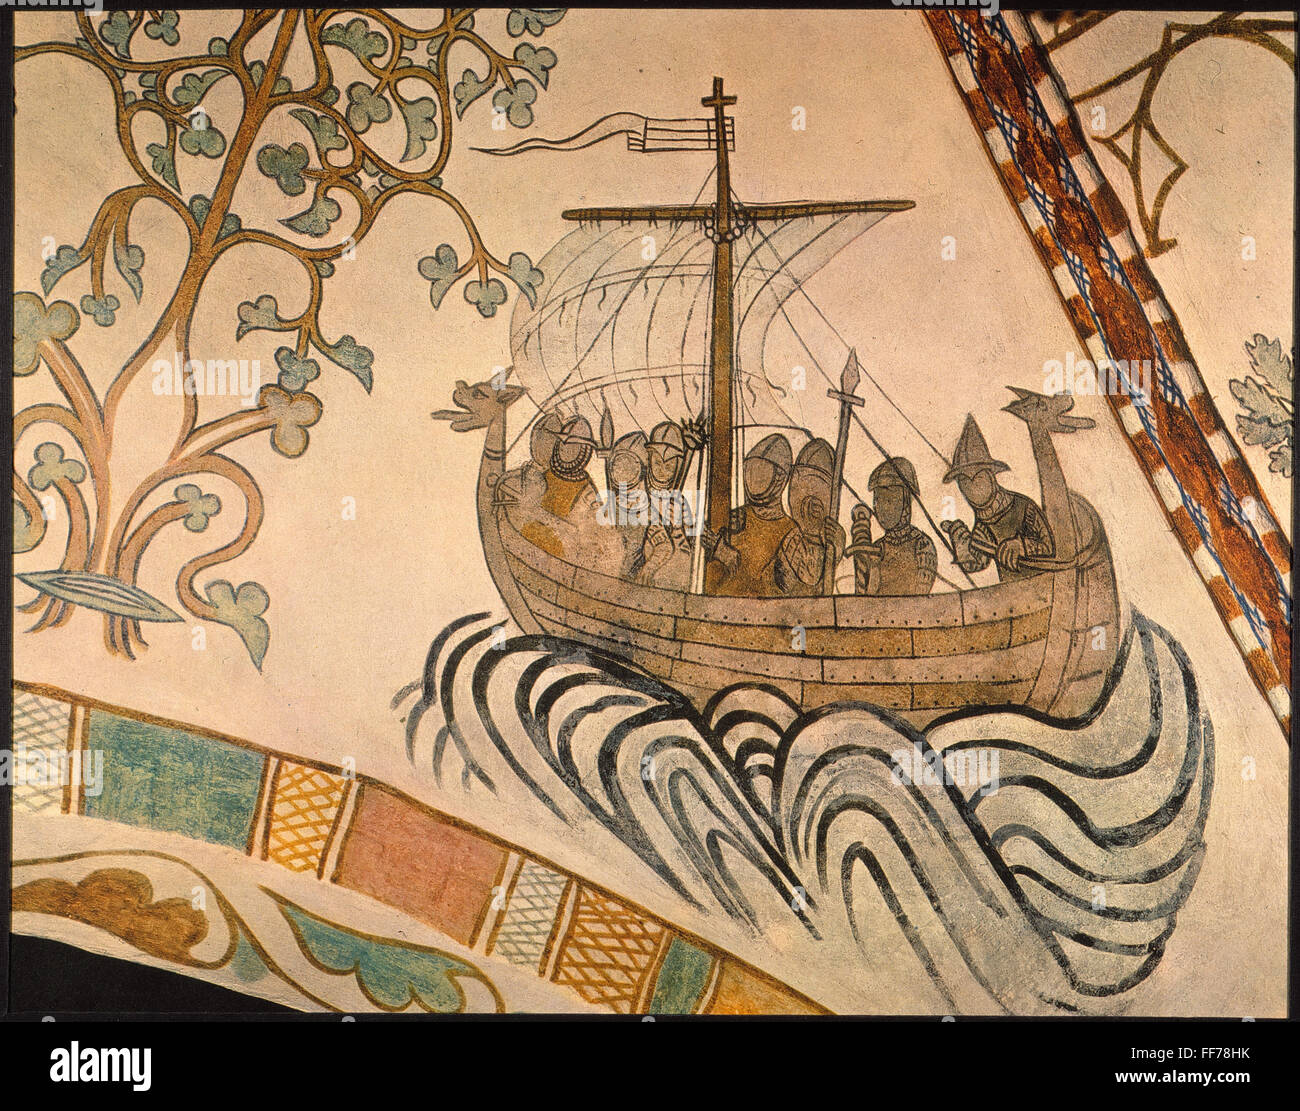 VIKING SHIP, 1030 A.D. /nThe Viking ship of King Harold III of Norway  sailing against the ship of his half-brother, the former King Olaf II of  Norway, in the latter's unsuccessful effort